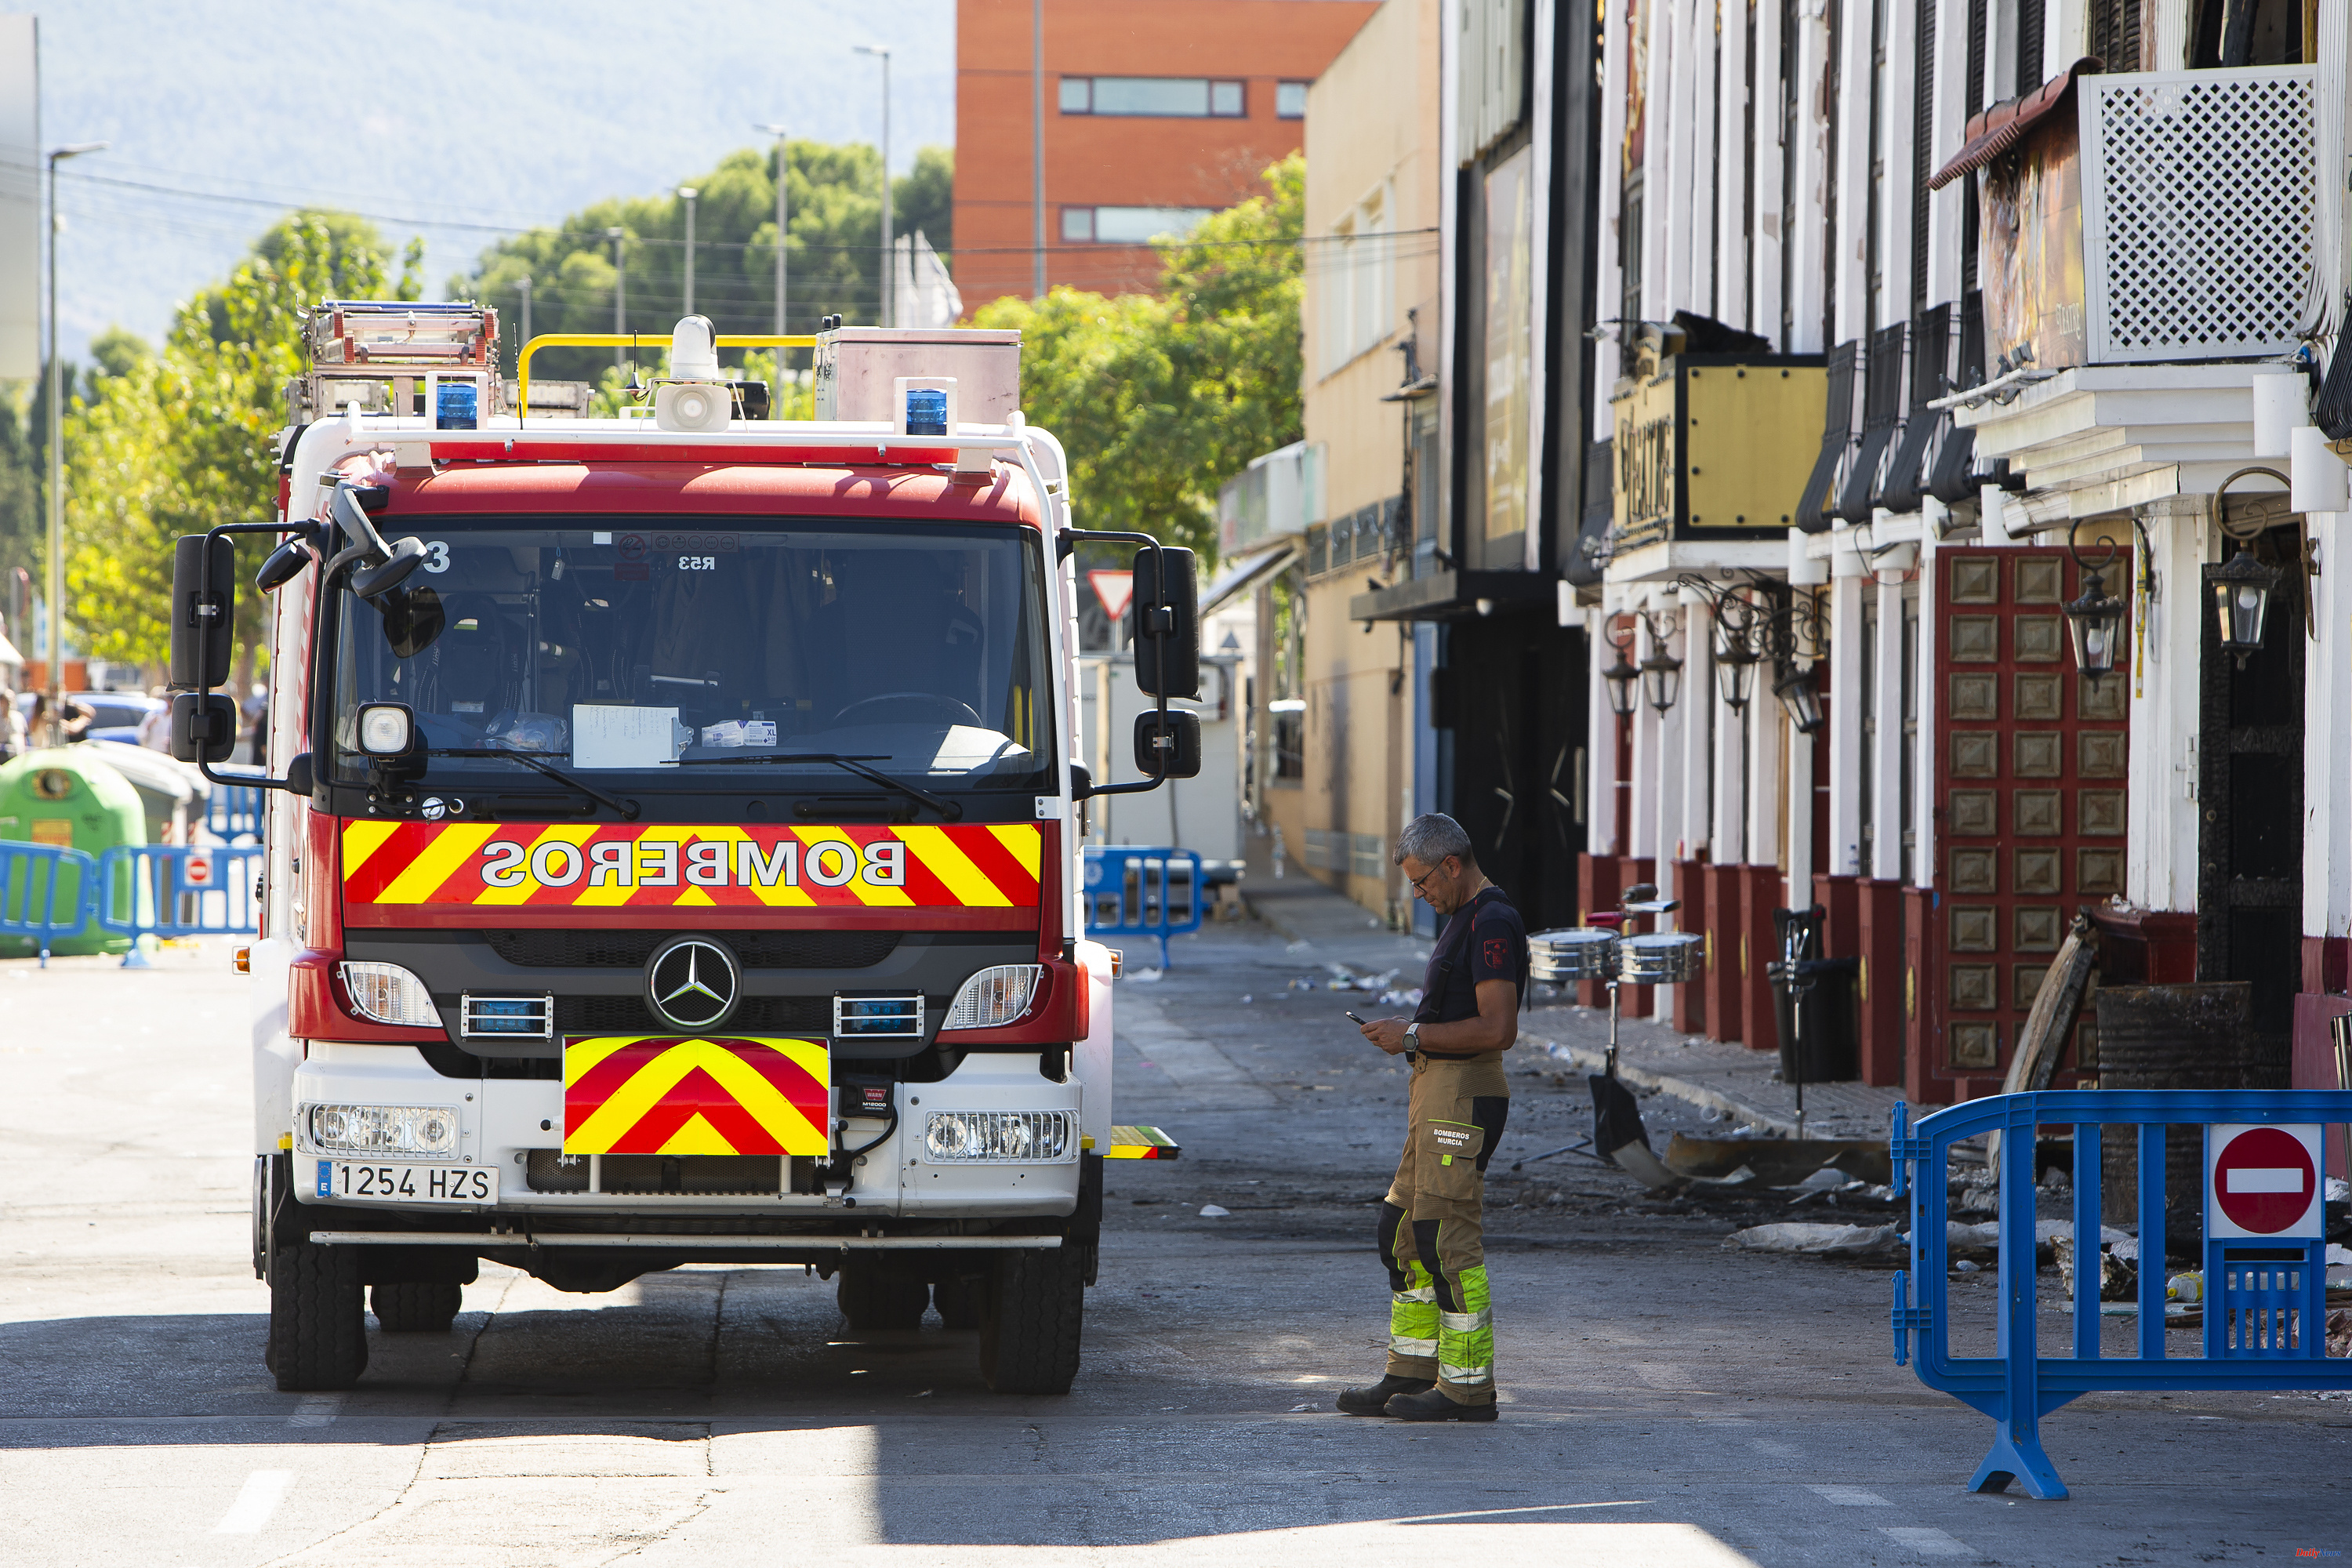 Spain They close another nightclub in the Atalayas area of ​​Murcia due to the fire in an electrical panel of the premises